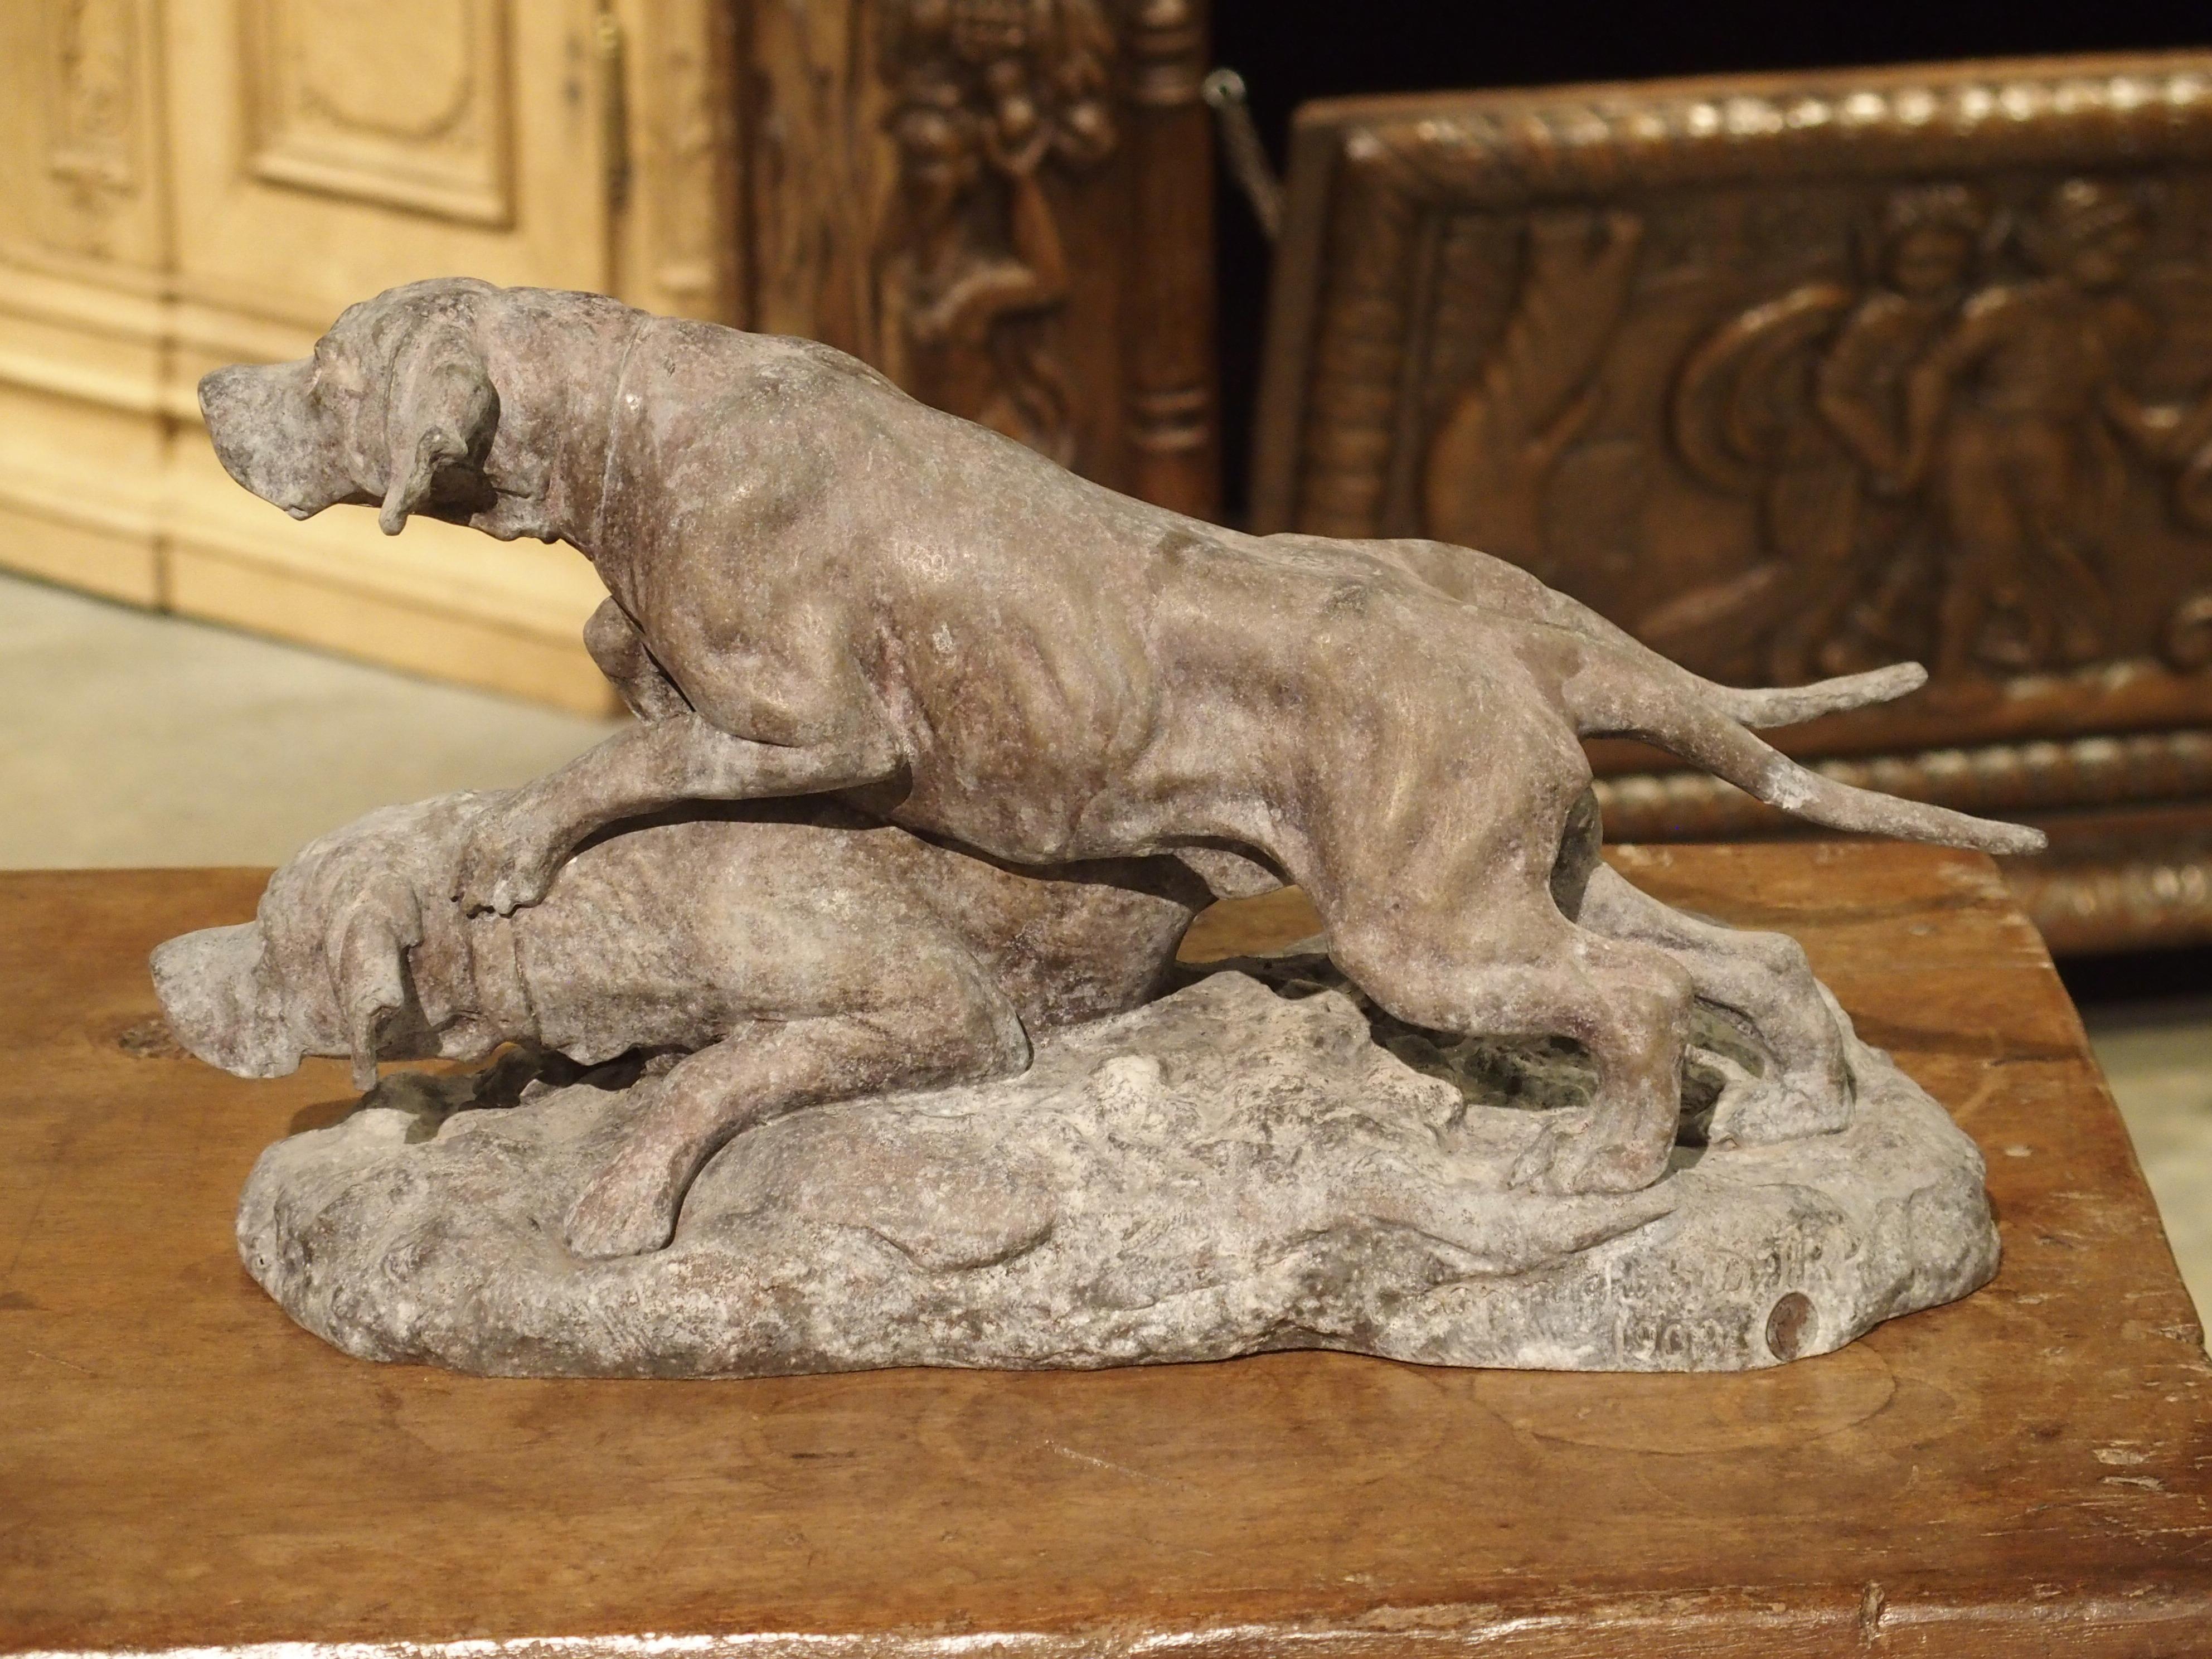 This antique sculpture of a pair of hunting dogs is made of patinated spelter and is from early 20th century, France.

Spelter is an alloy made of zinc and either copper or lead. Spelter is easier to cast than other metals and can be more